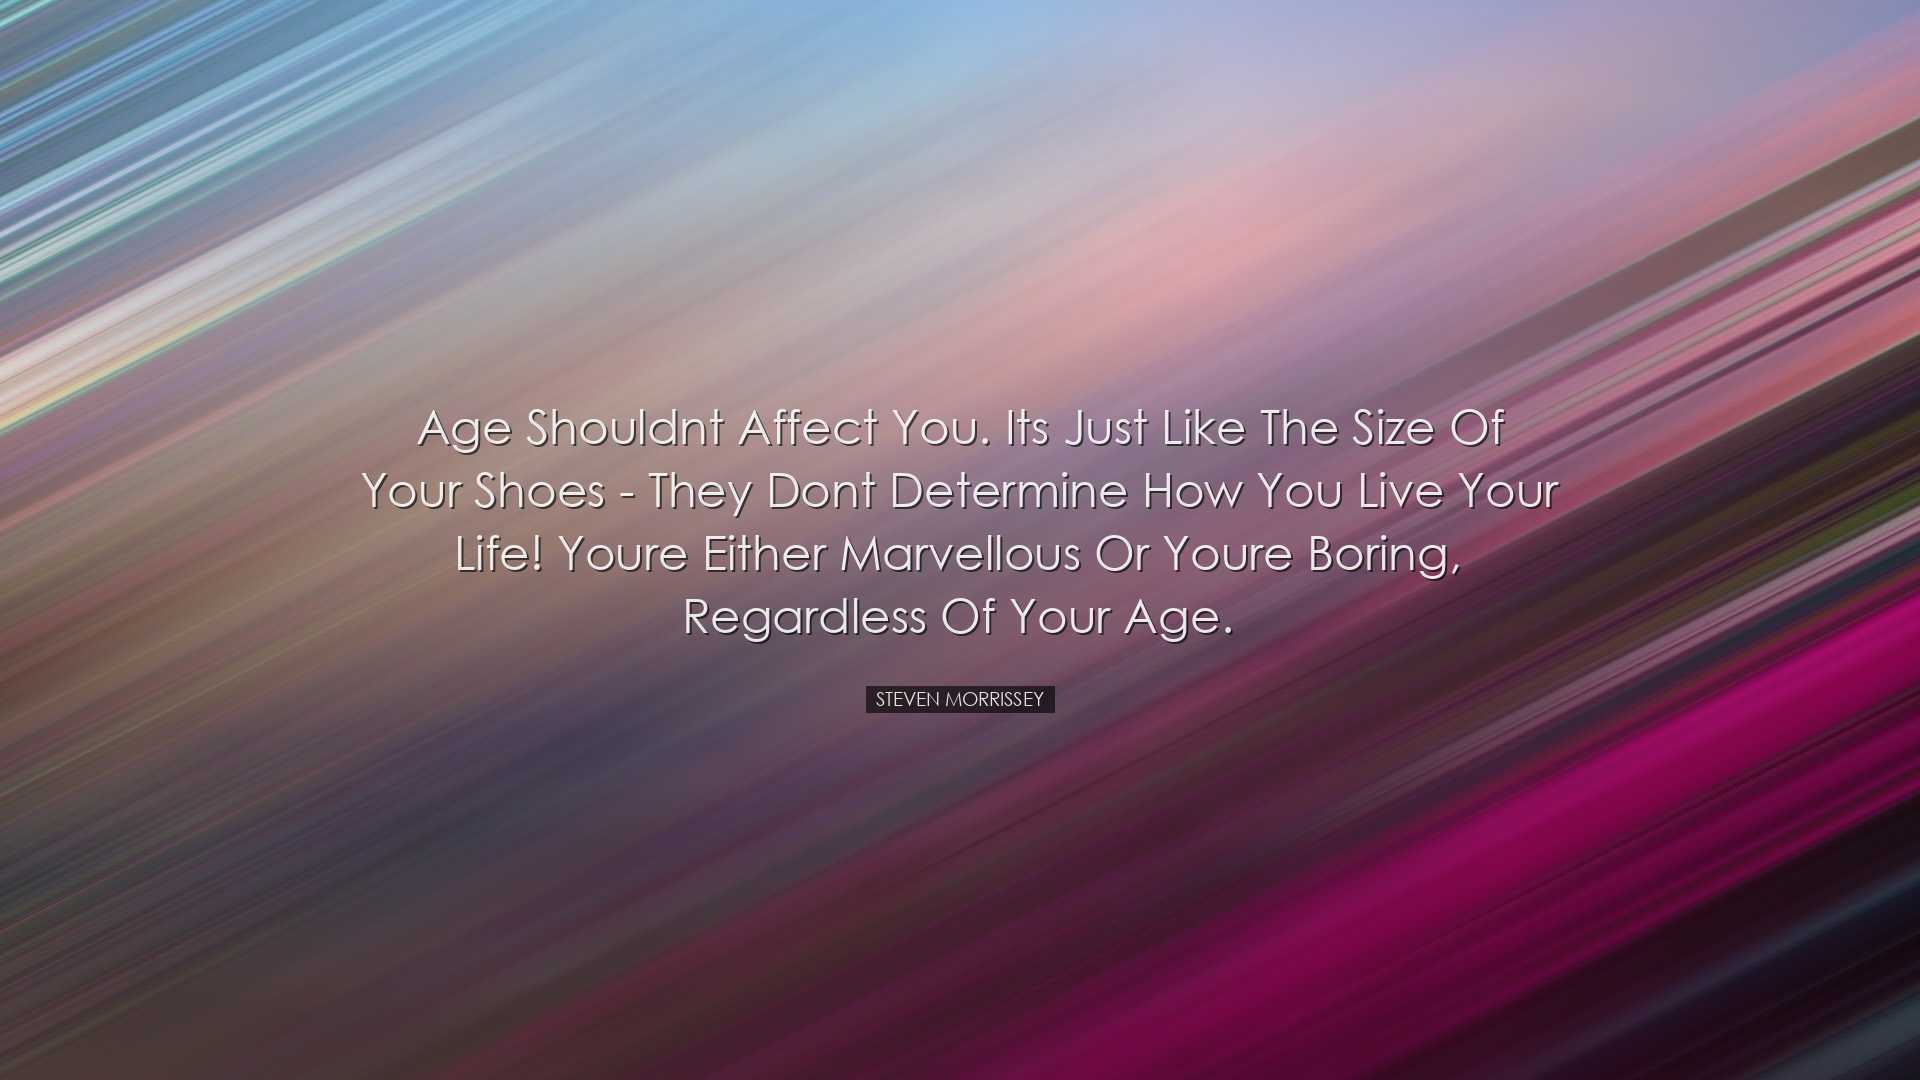 Age shouldnt affect you. Its just like the size of your shoes - th